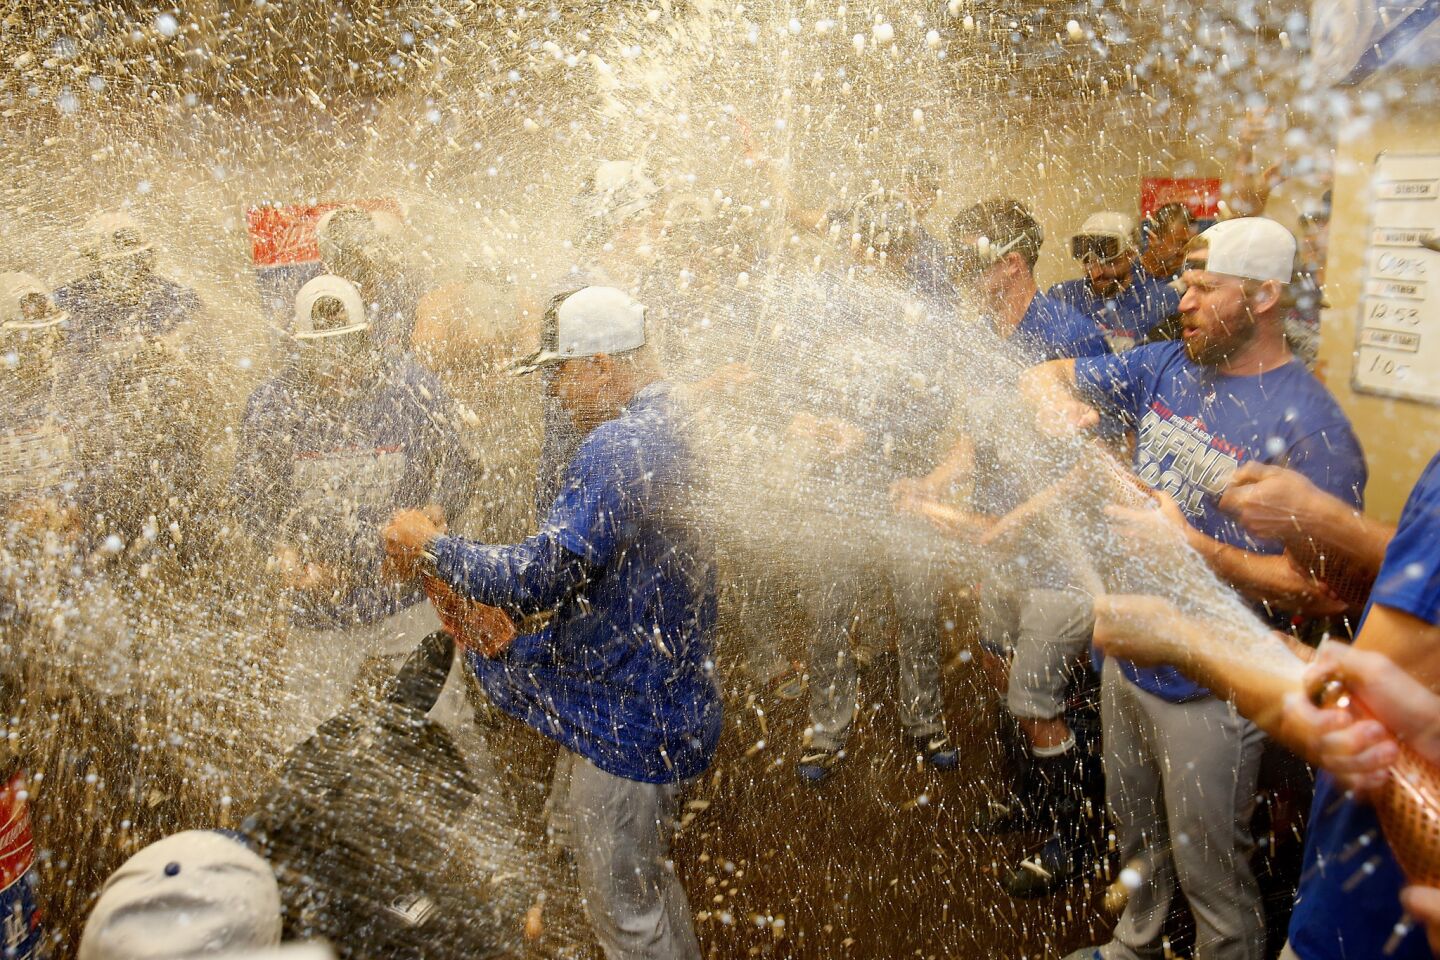 SAN FRANCISCO, CA - SEPTEMBER 29: Manager Dave Roberts #30 of the Los Angeles Dodgers is sprayed with champagne as Dodgers players celebrate after clinching a post season spot by defeating the San Francisco Giants at AT&T Park on September 29, 2018 in San Francisco, California. (Photo by Lachlan Cunningham/Getty Images) ** OUTS - ELSENT, FPG, CM - OUTS * NM, PH, VA if sourced by CT, LA or MoD **